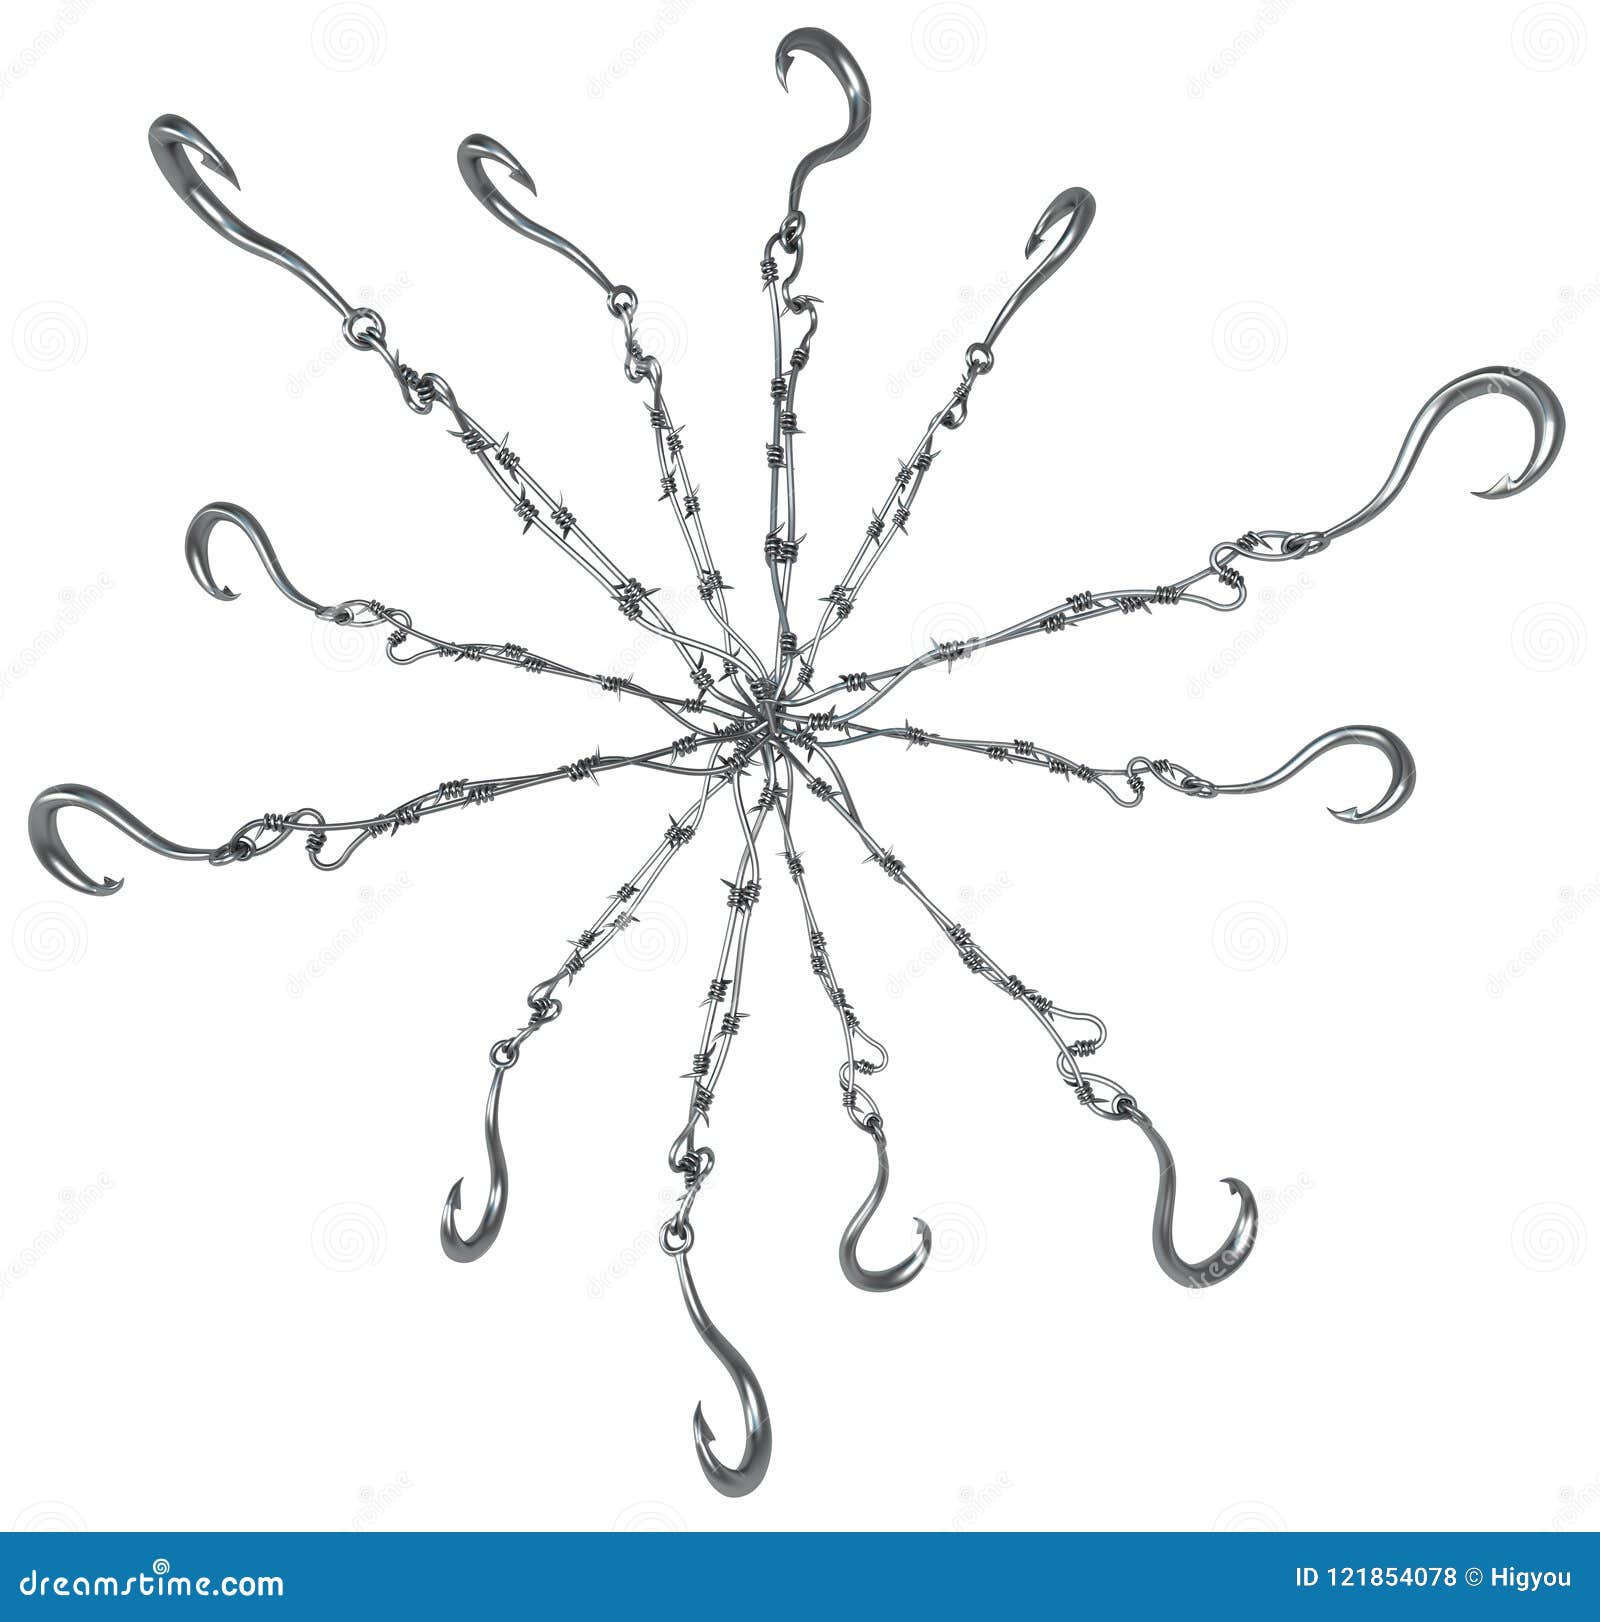 https://thumbs.dreamstime.com/z/barbed-wire-hooks-spread-barbed-wire-hooks-grey-metal-d-illustration-isolated-horizontal-over-white-121854078.jpg